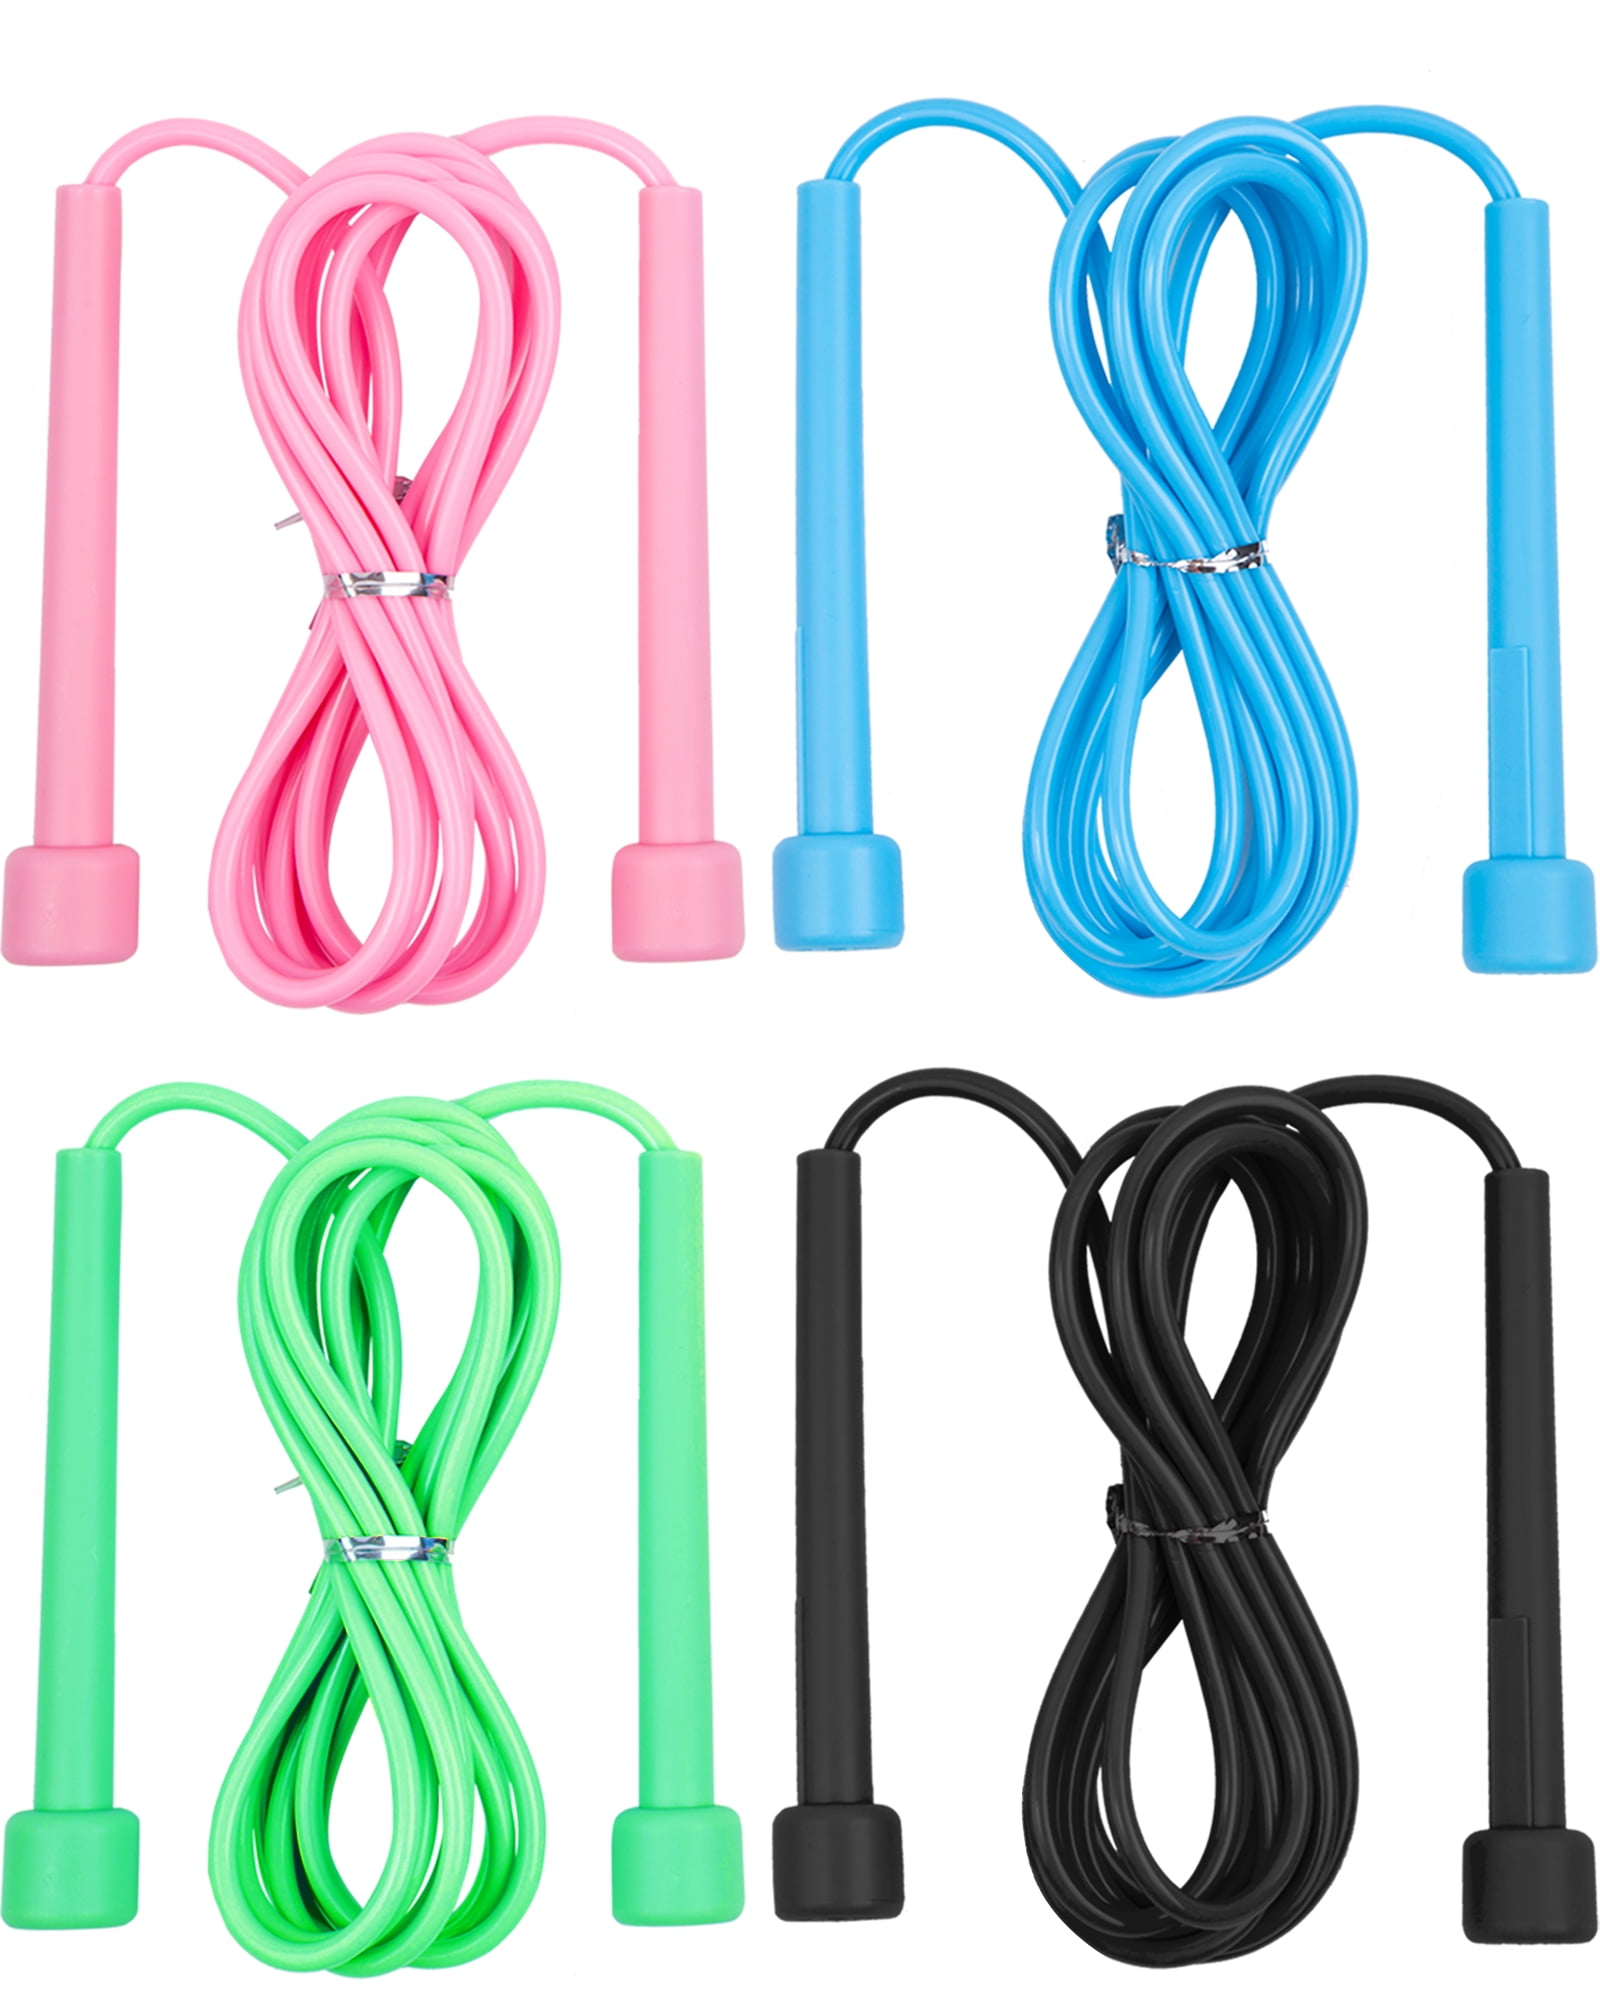 Details about   1Pcs Cotton Rope Skipping Jump Rope Wooden Handle Adjustable Length 3m 5m 7m 10m 